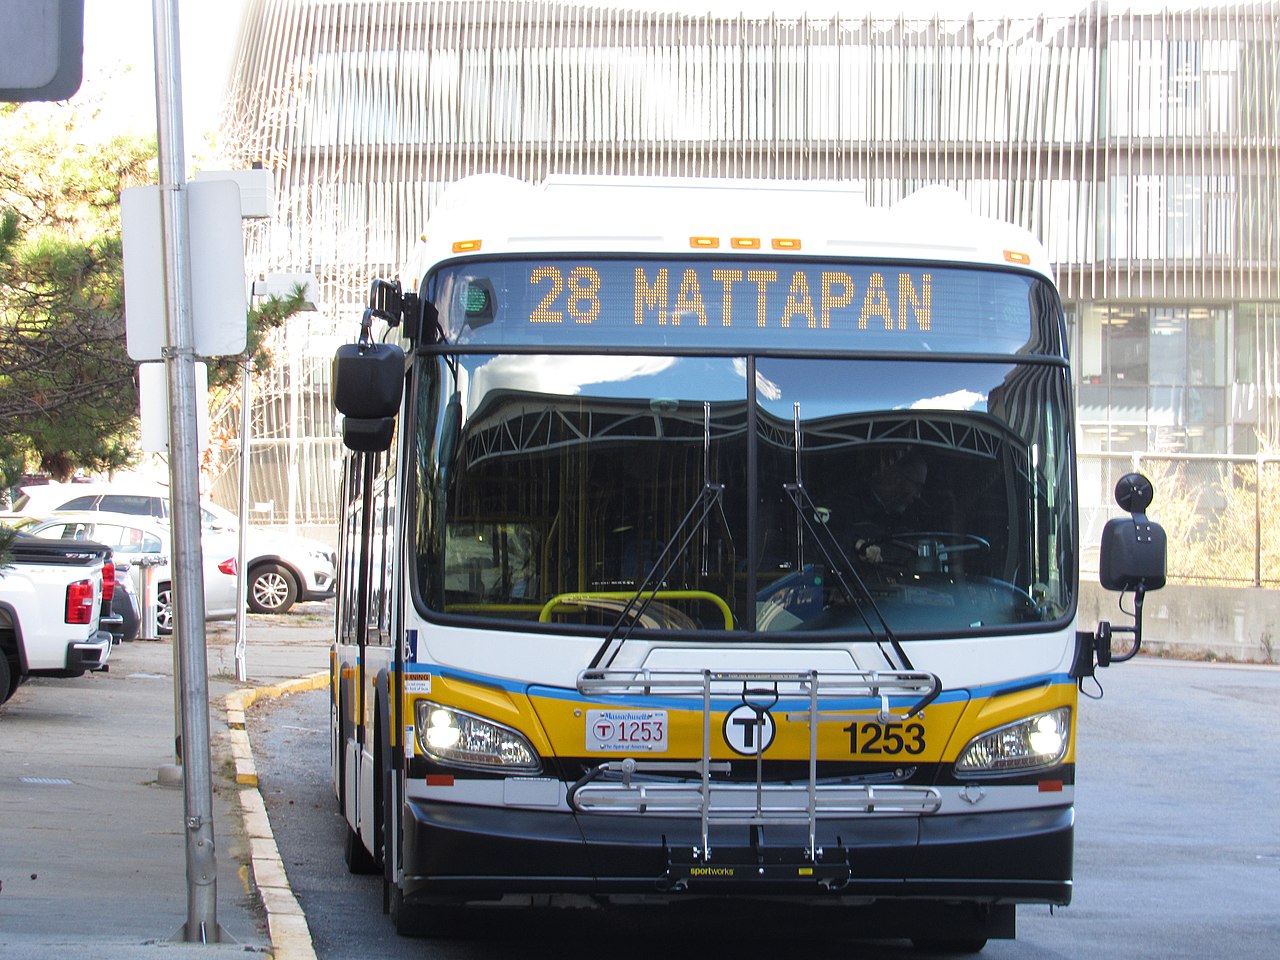 A Route 28 bus at Ruggles station.